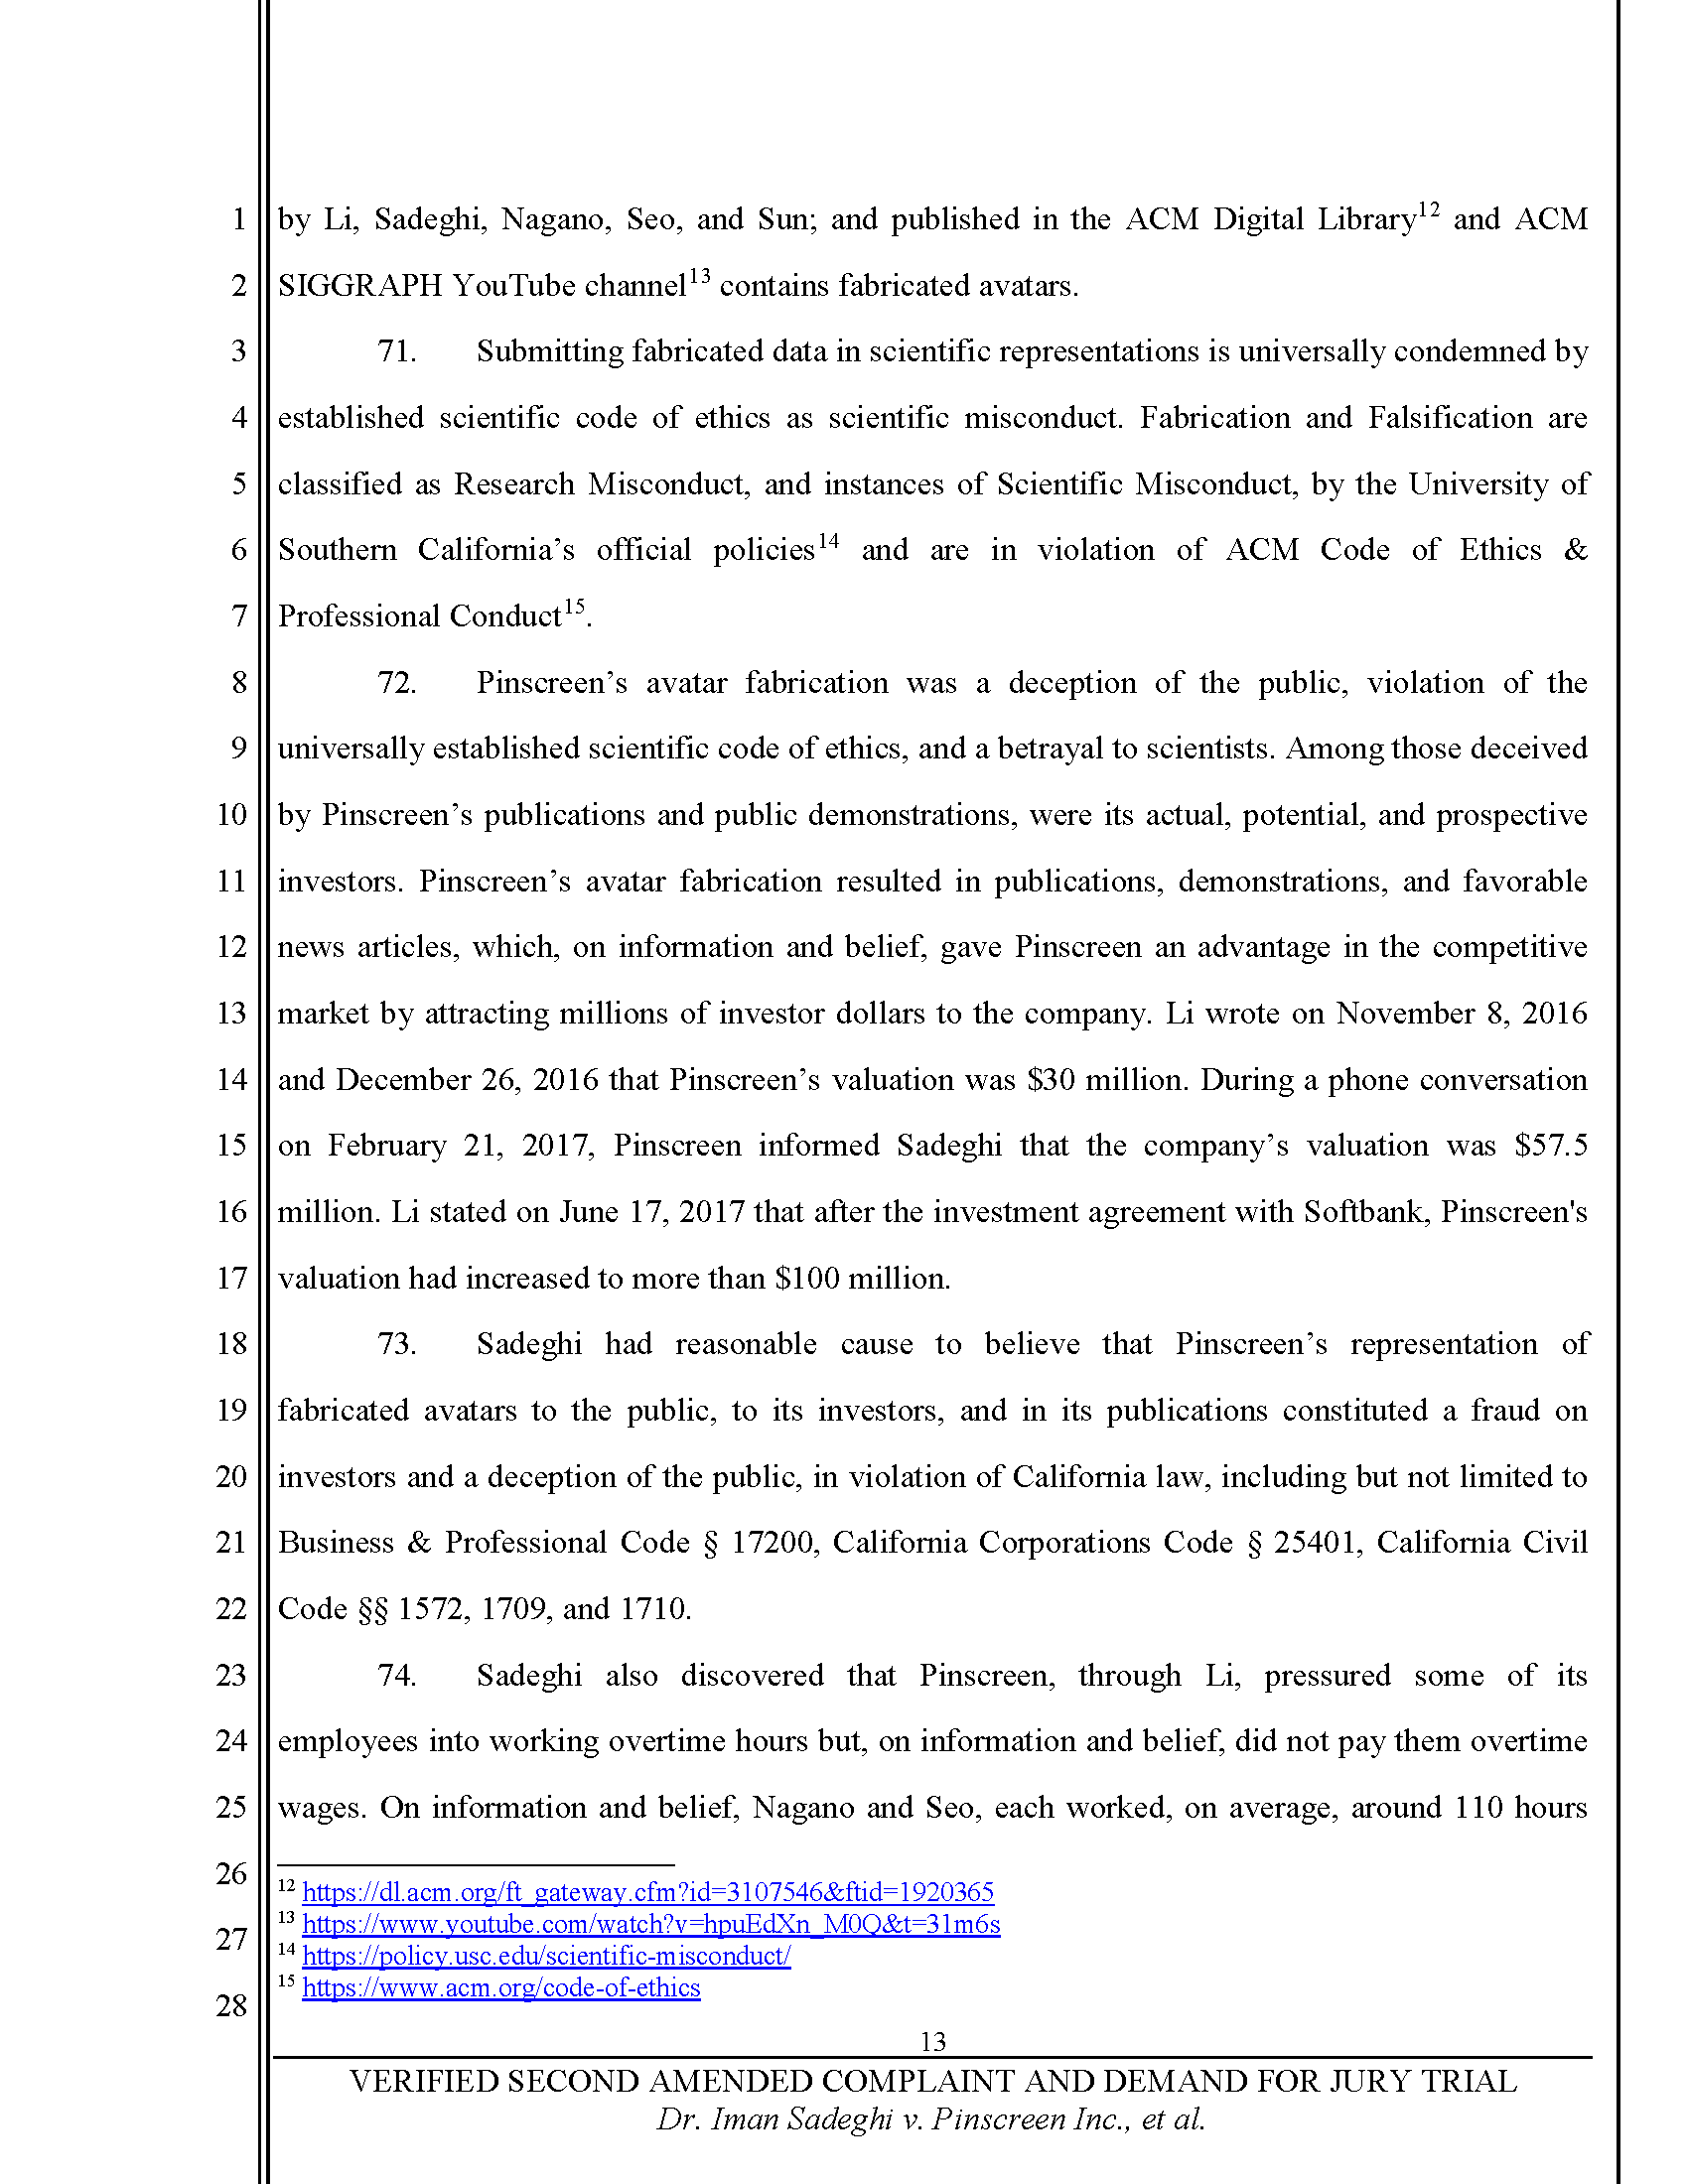 Second Amended Complaint (SAC) Page 14